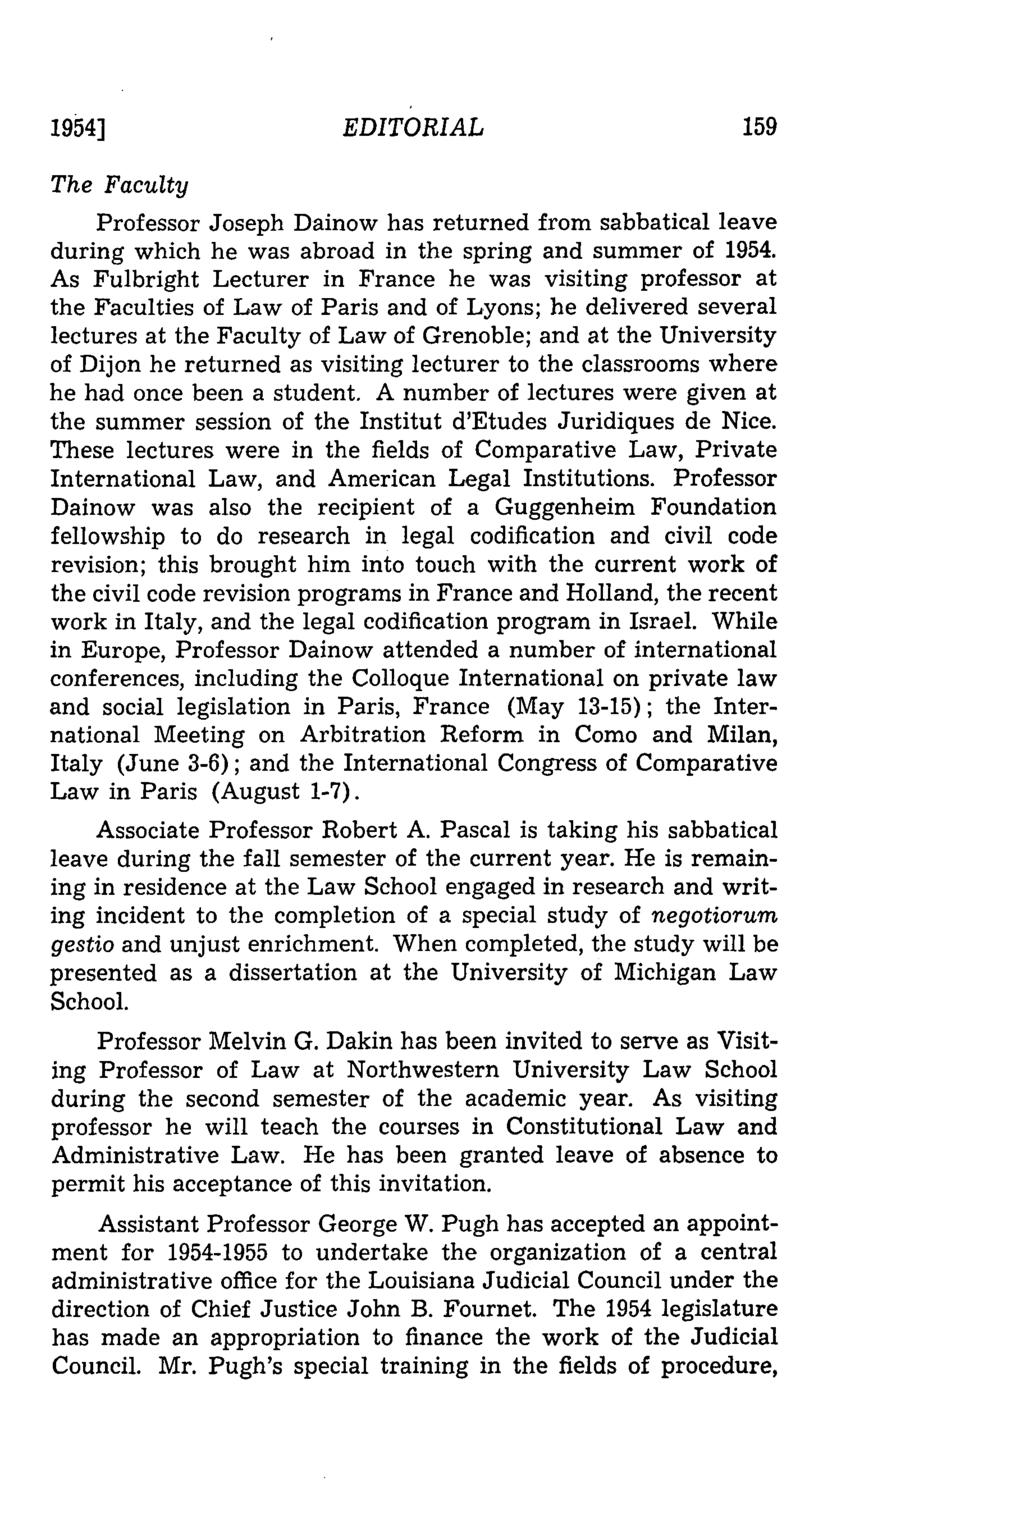 1954] EDITORIAL The Faculty Professor Joseph Dainow has returned from sabbatical leave during which he was abroad in the spring and summer of 1954.